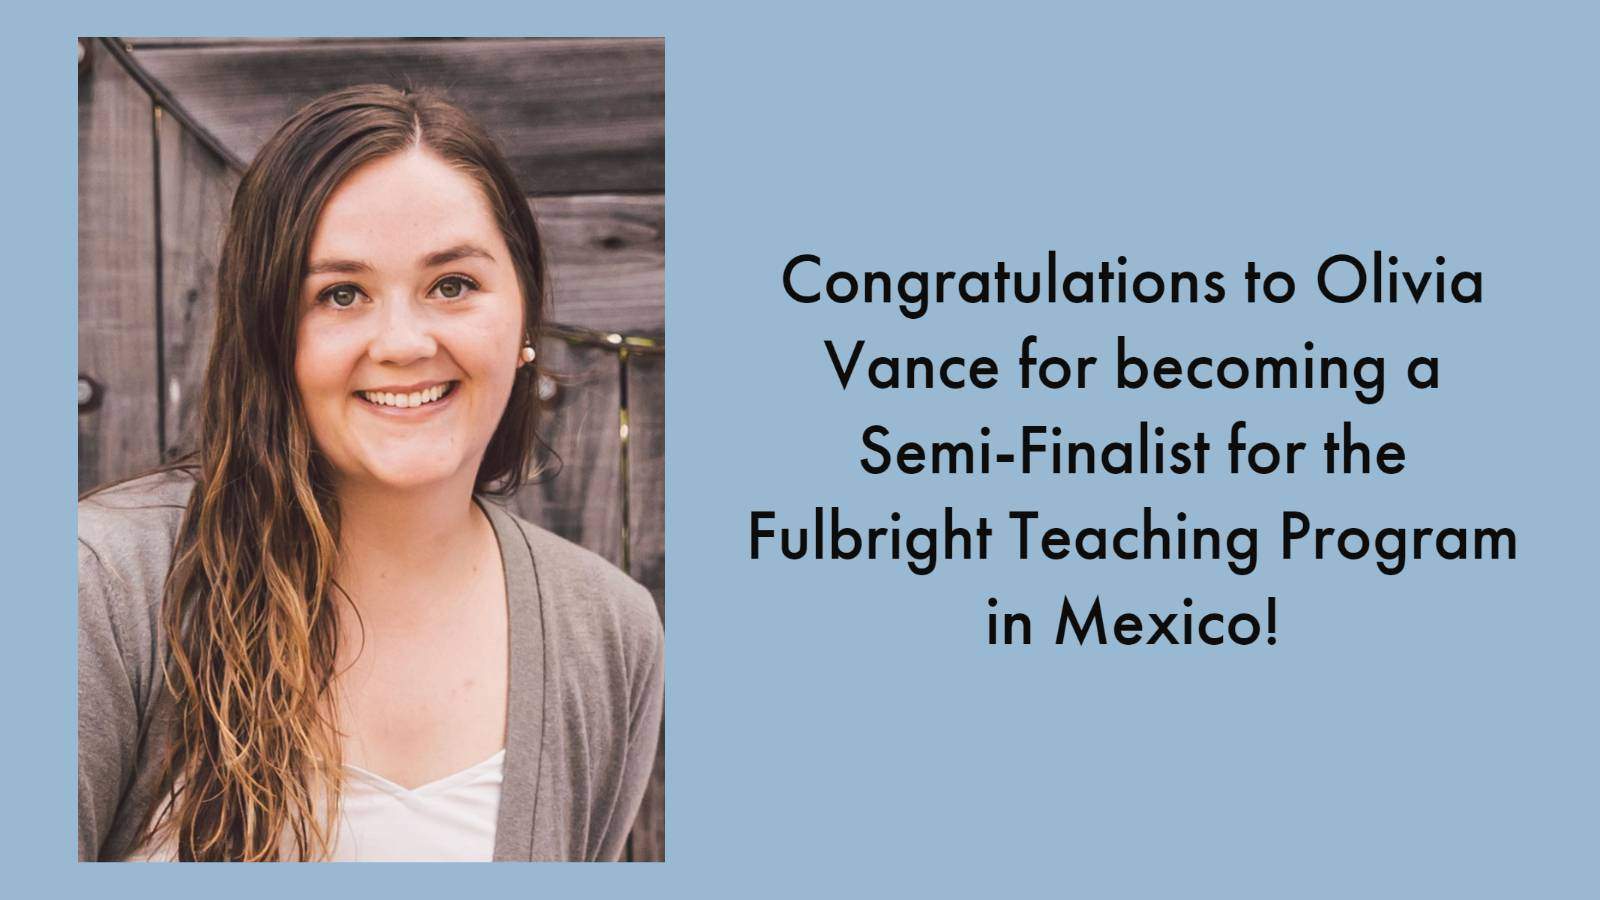 image: woman with long hair in front of wooden door. text: Congratulations to Olivia Vance for becoming a Semi-Finalist for the Fulbright Teaching Program in Mexico!